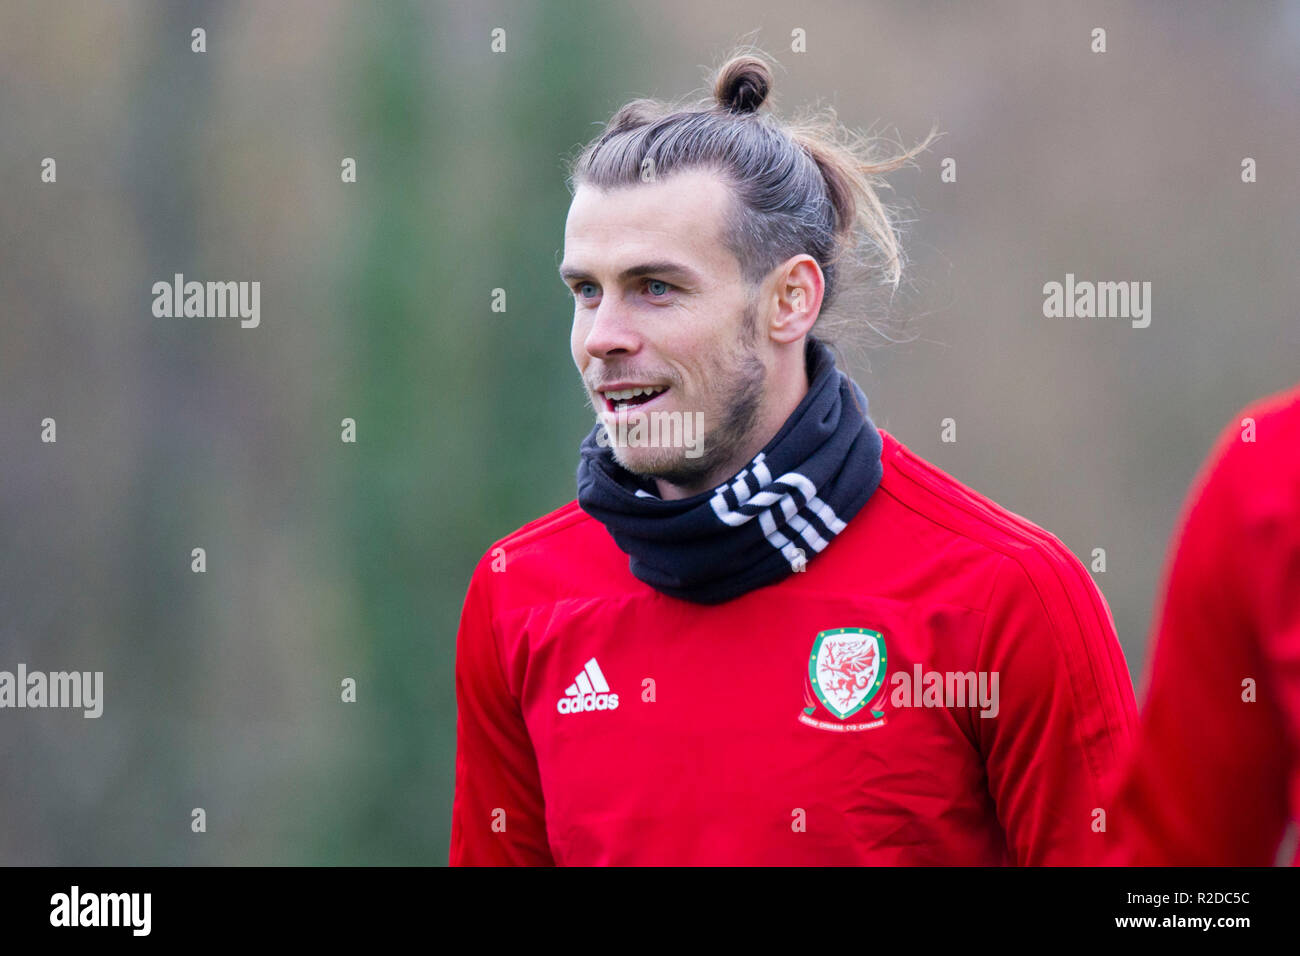 Hensol, Wales, UK. November 19th 2018. Gareth Bale during Wales national team training ahead of the friendly match against Albania. Credit: Mark Hawkins/Alamy Live News Stock Photo